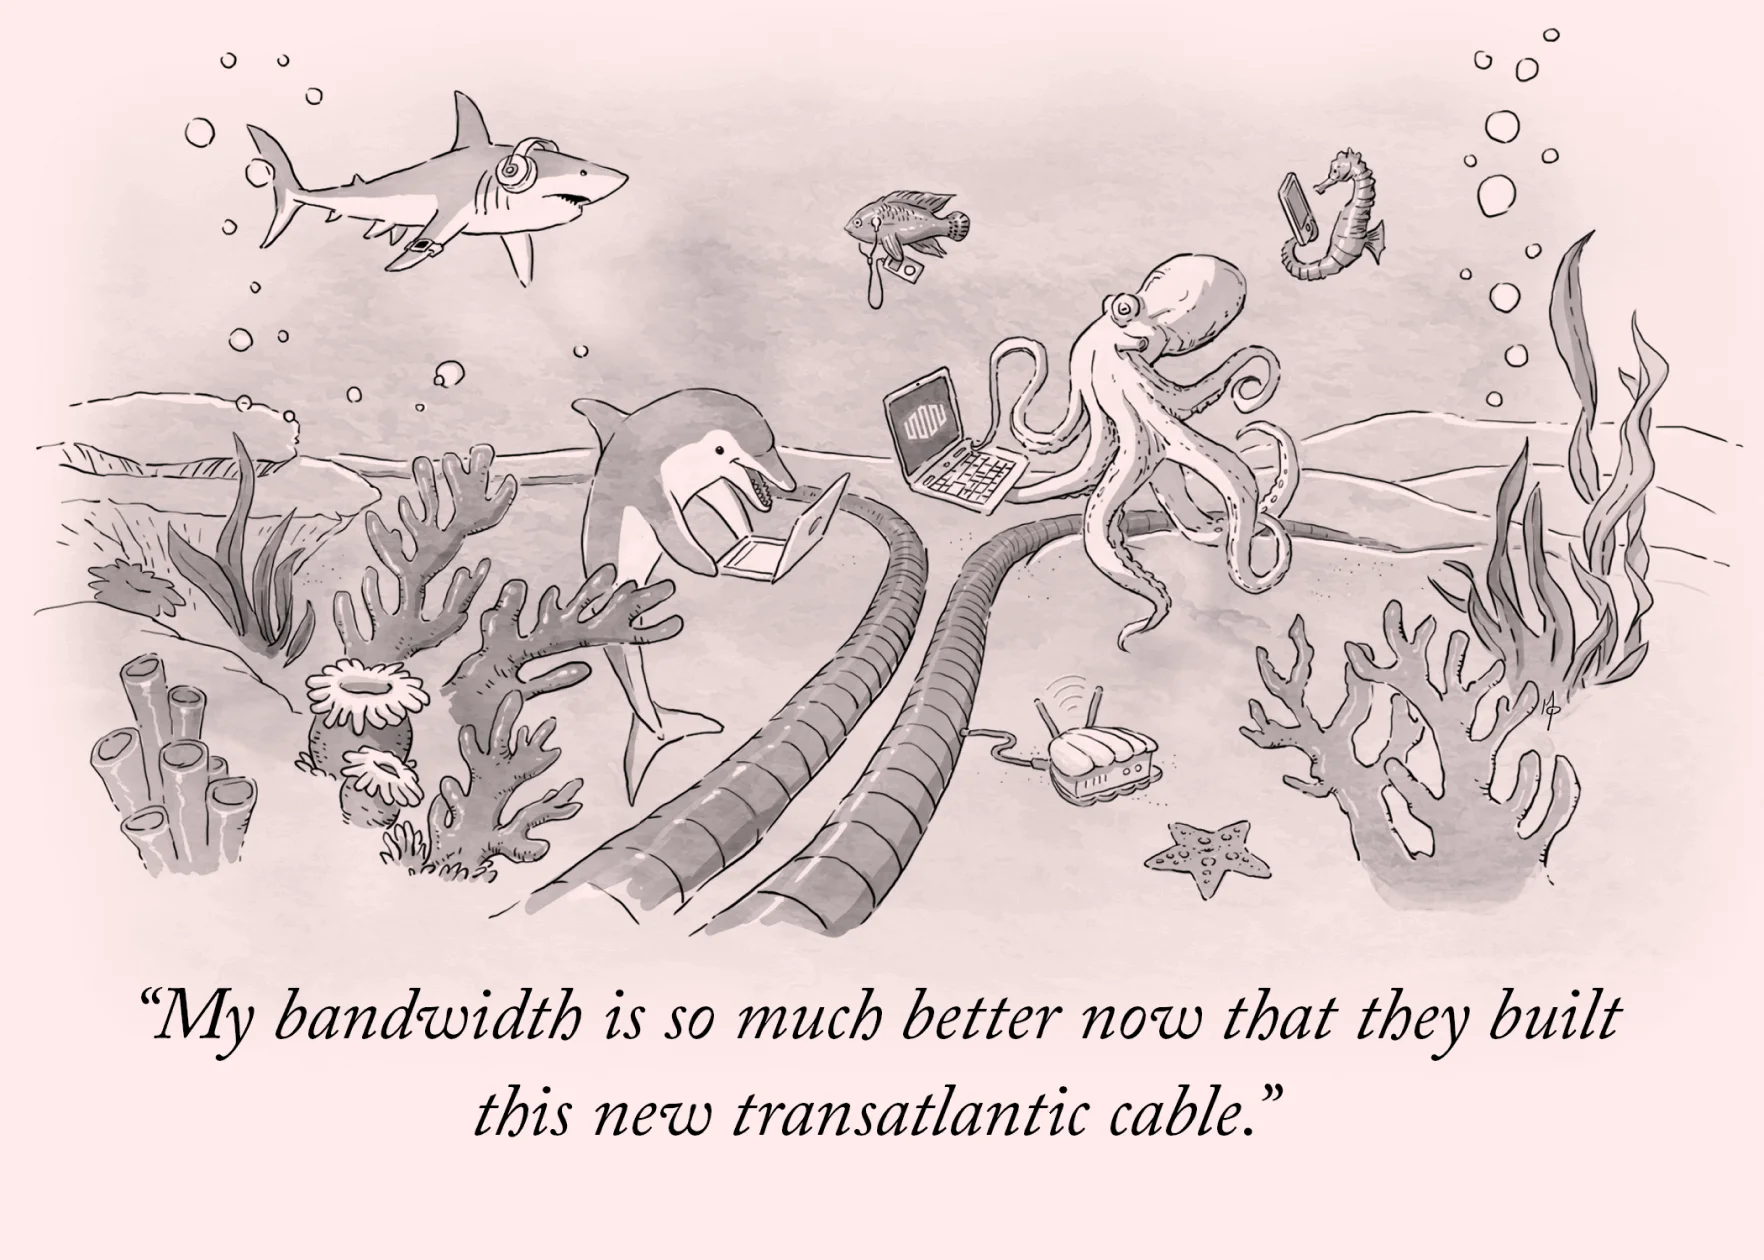 A cartoon-style illustration of an underwater scene. Marine life is gathered around a Transatlantic cable with their Laptops and other digital devices. The caption reads: My bandwidth is so much better now that they built this new transatlantic cable.